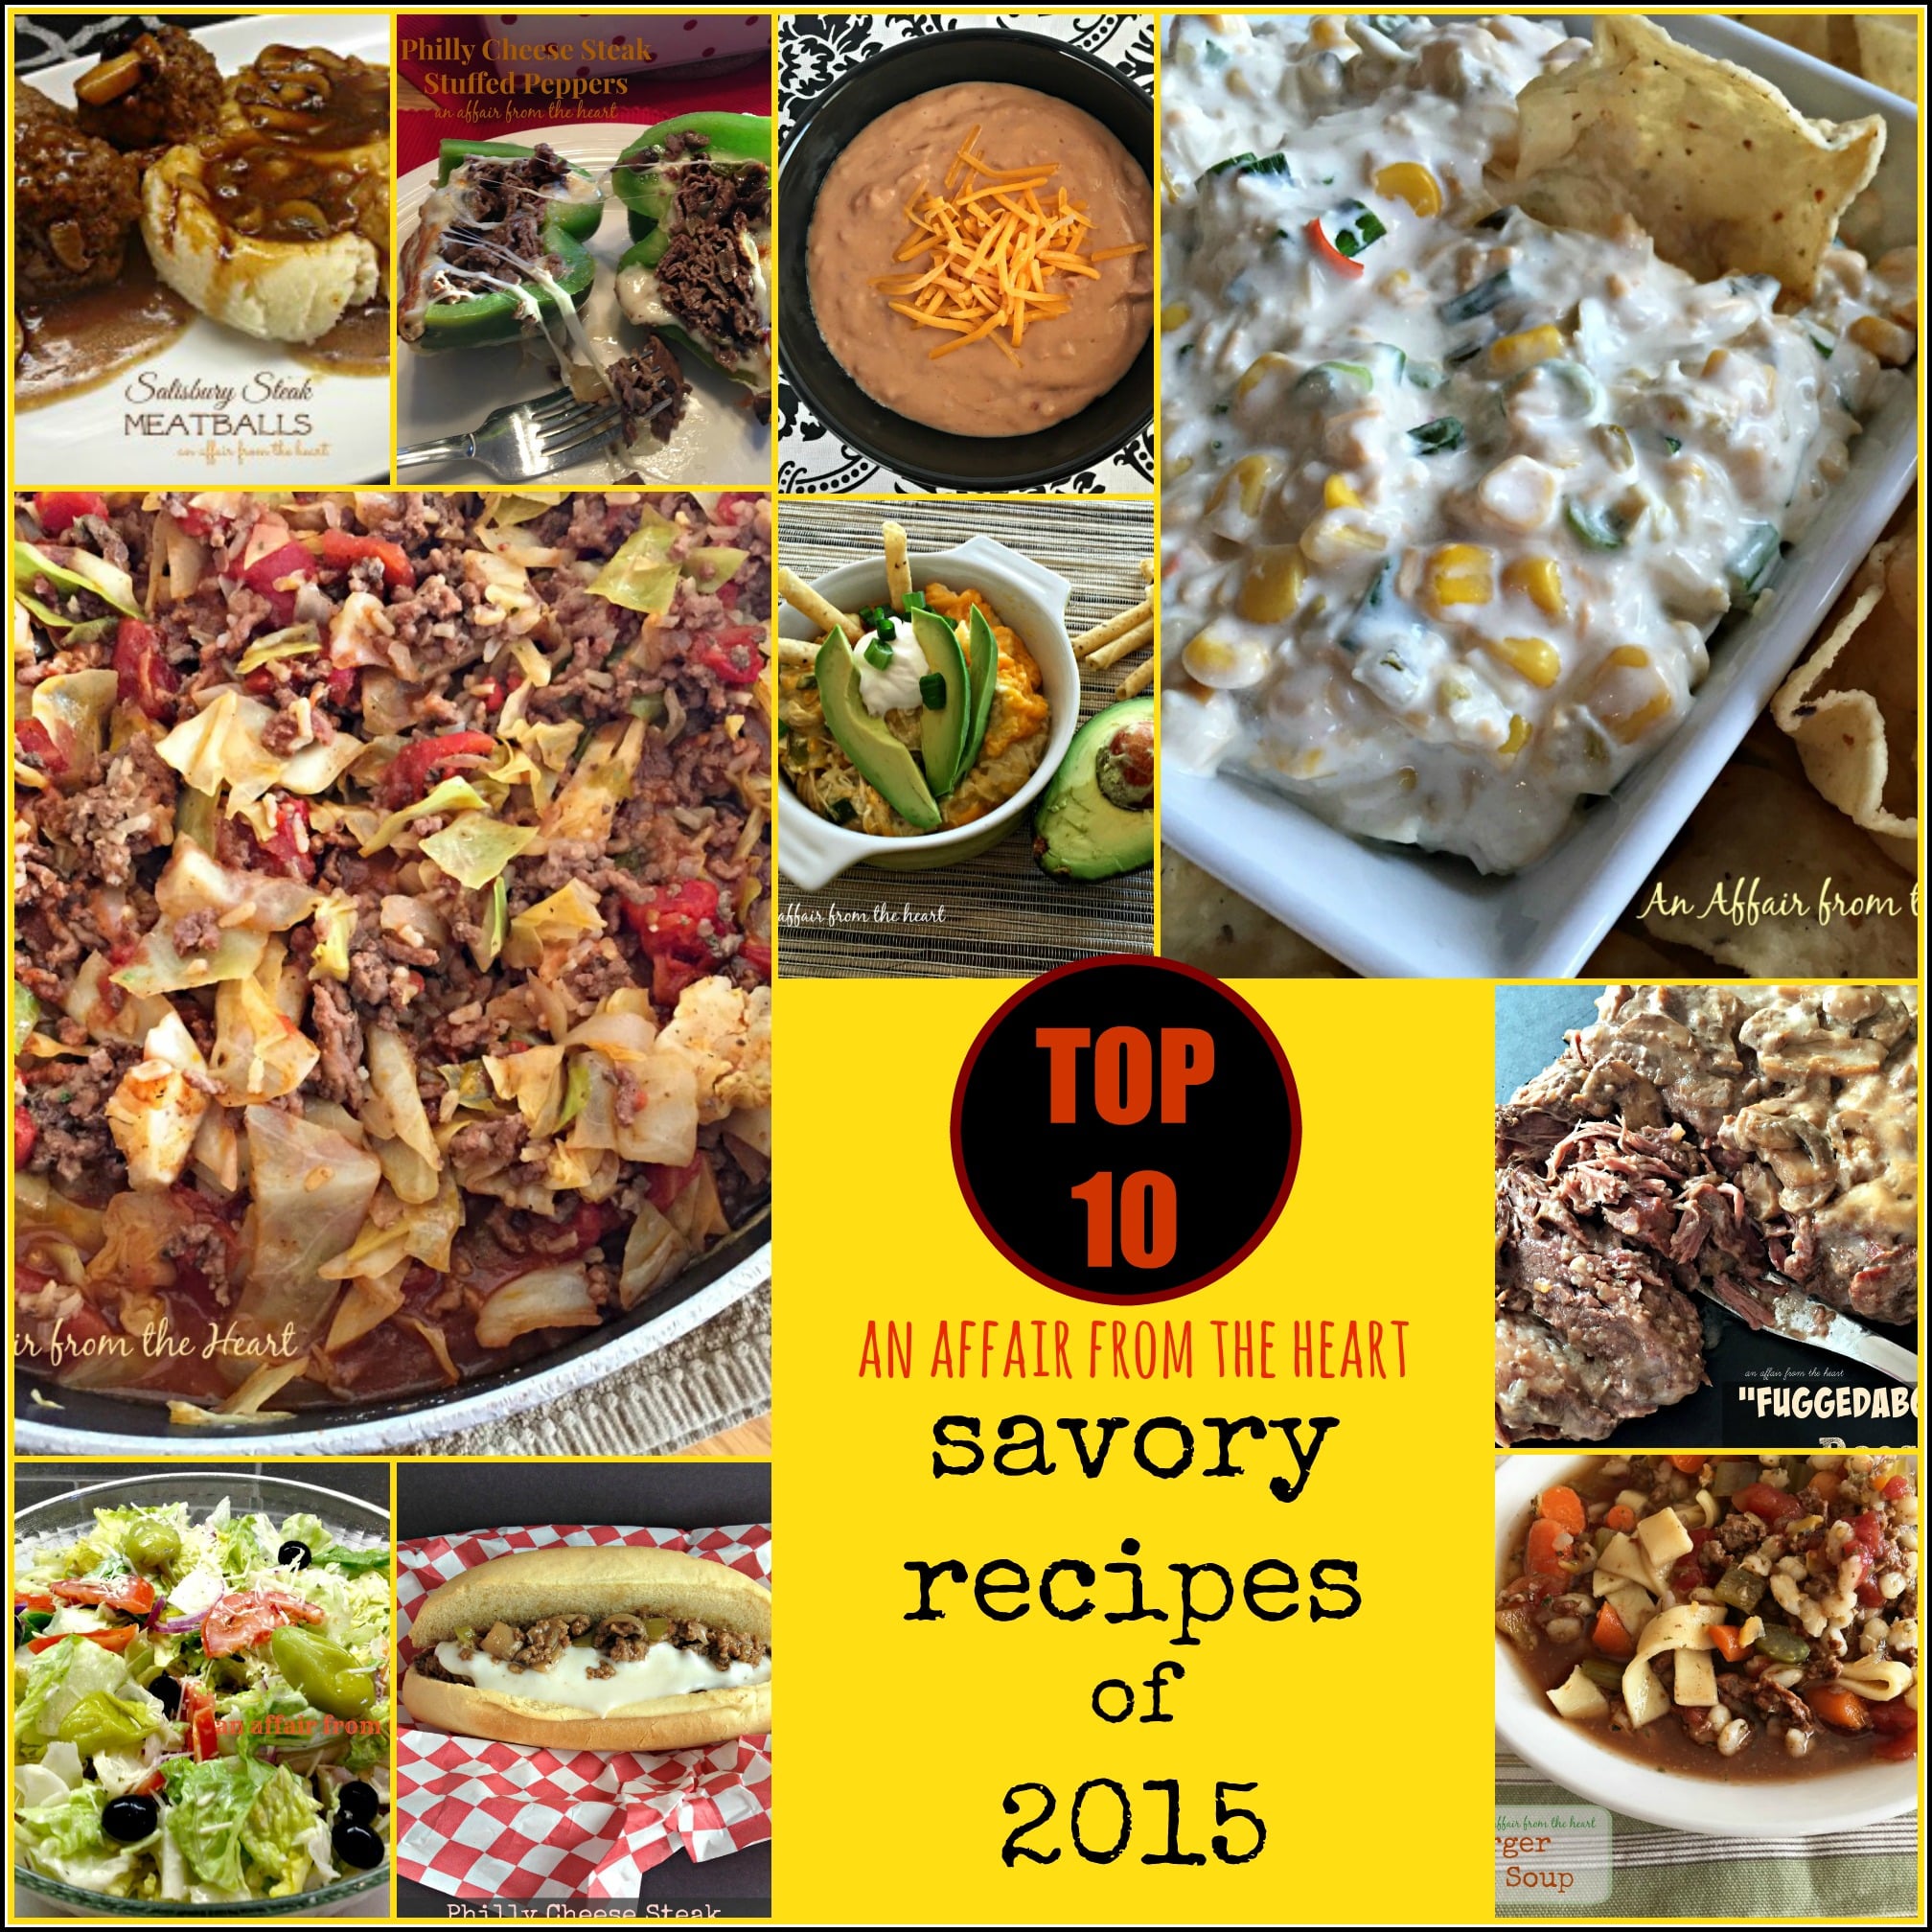 Top 10 Savory Recipes of 2015